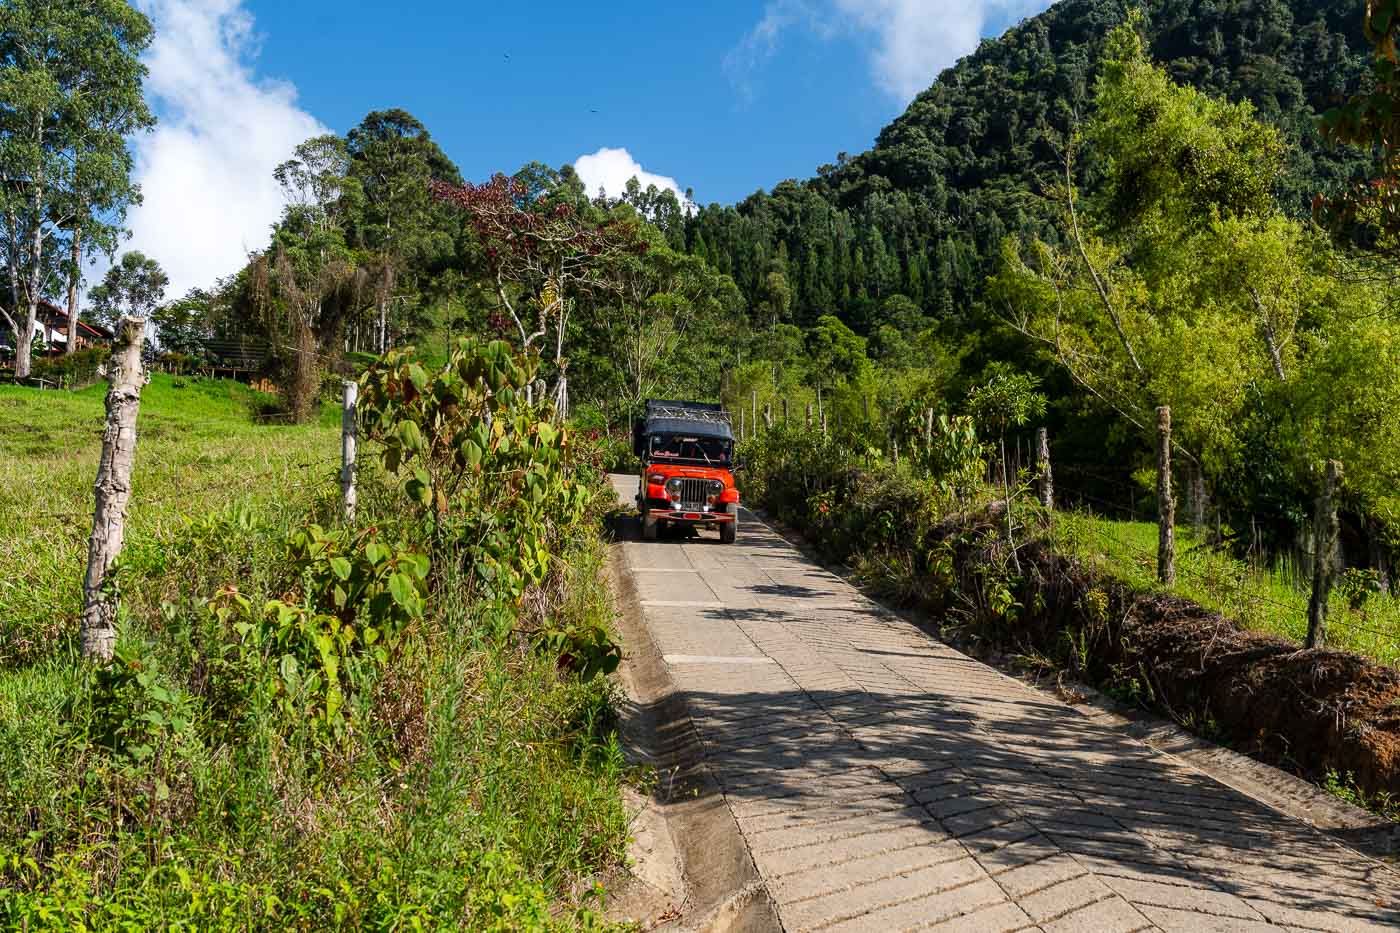 A red jeep descending down a hill in the mountains surrounding Jardin.